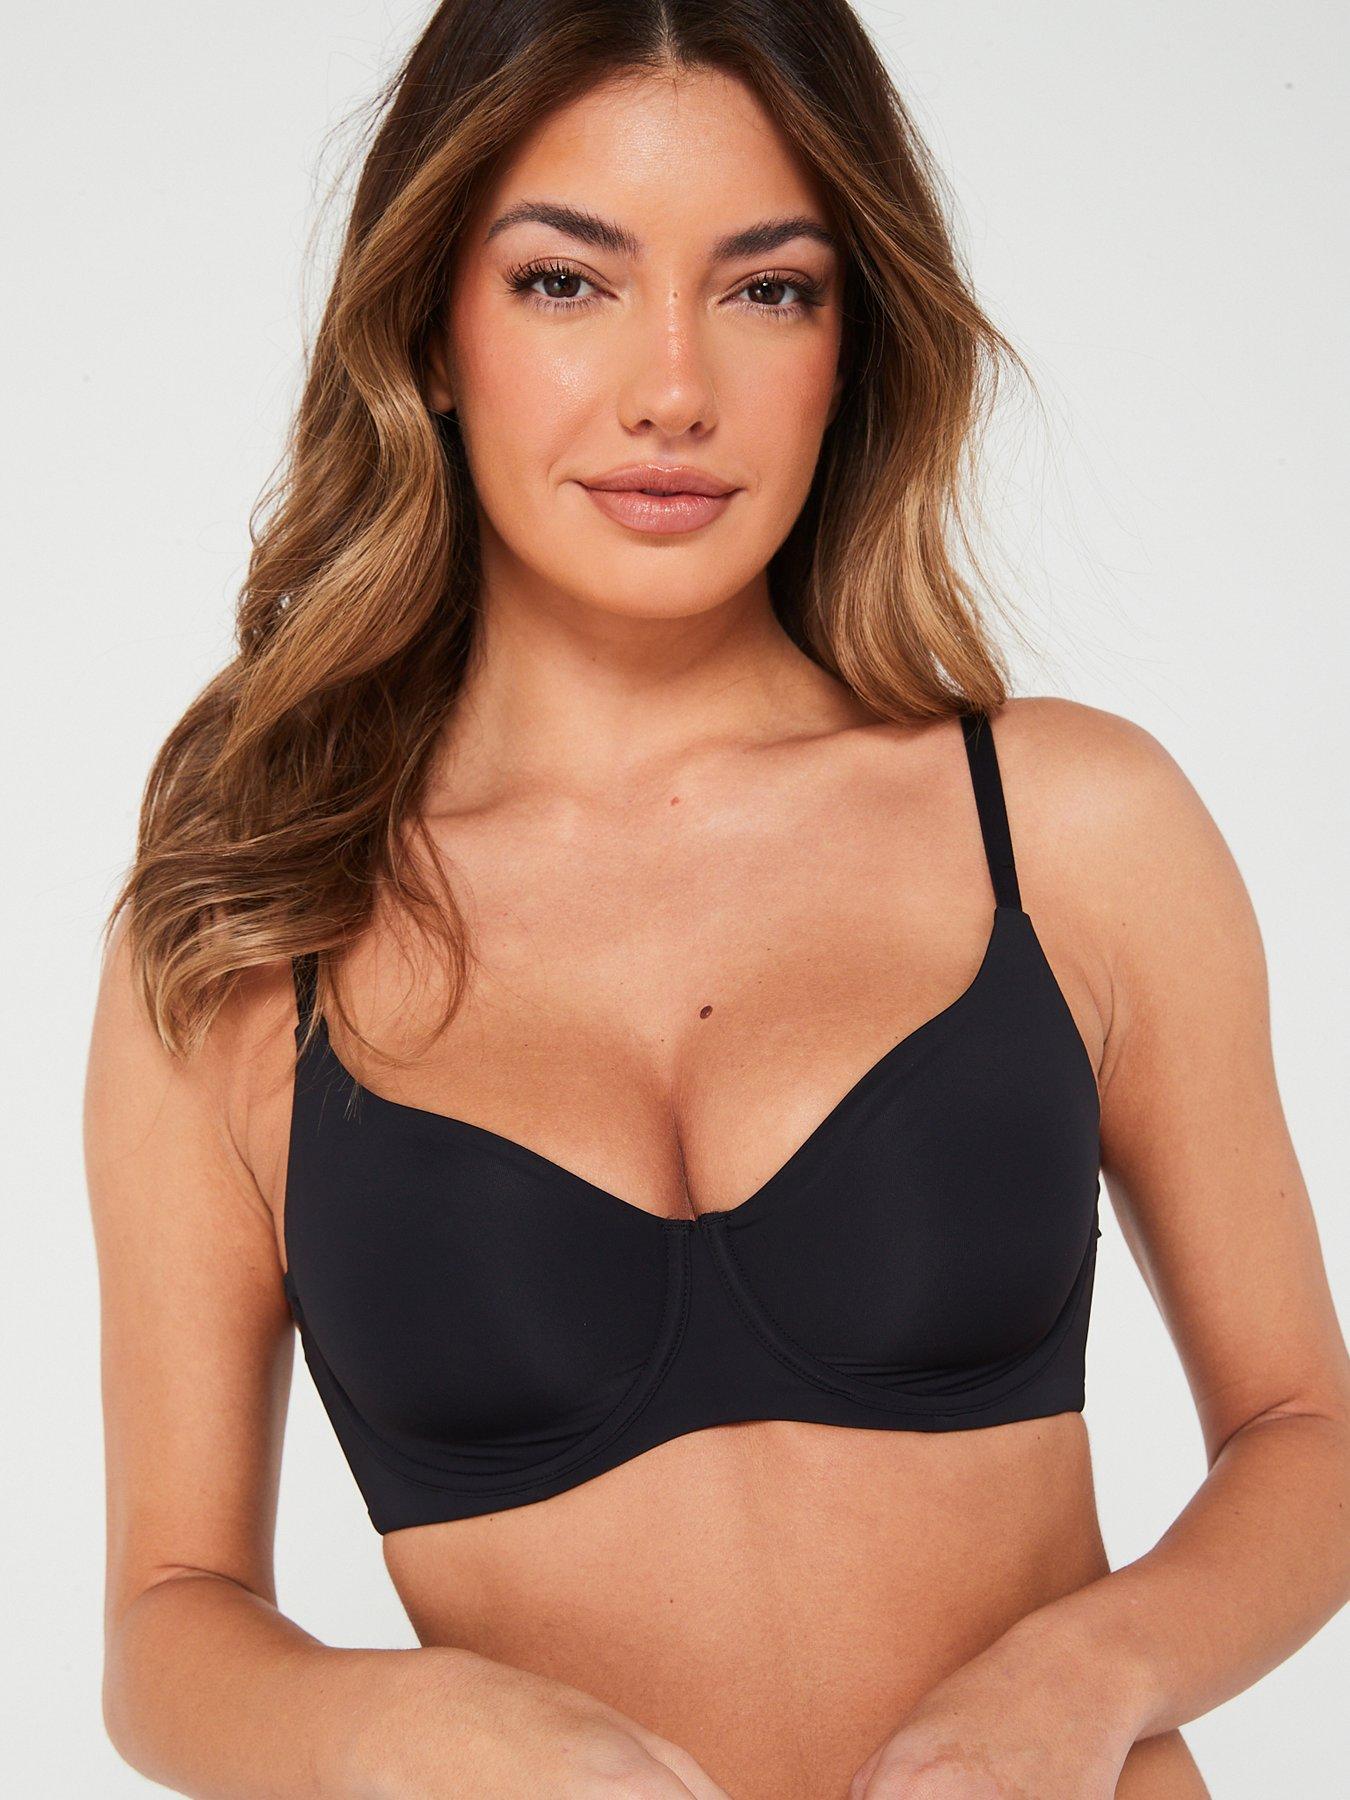 Fiesta recycled satin triangle bralette with lace detail black Dorina